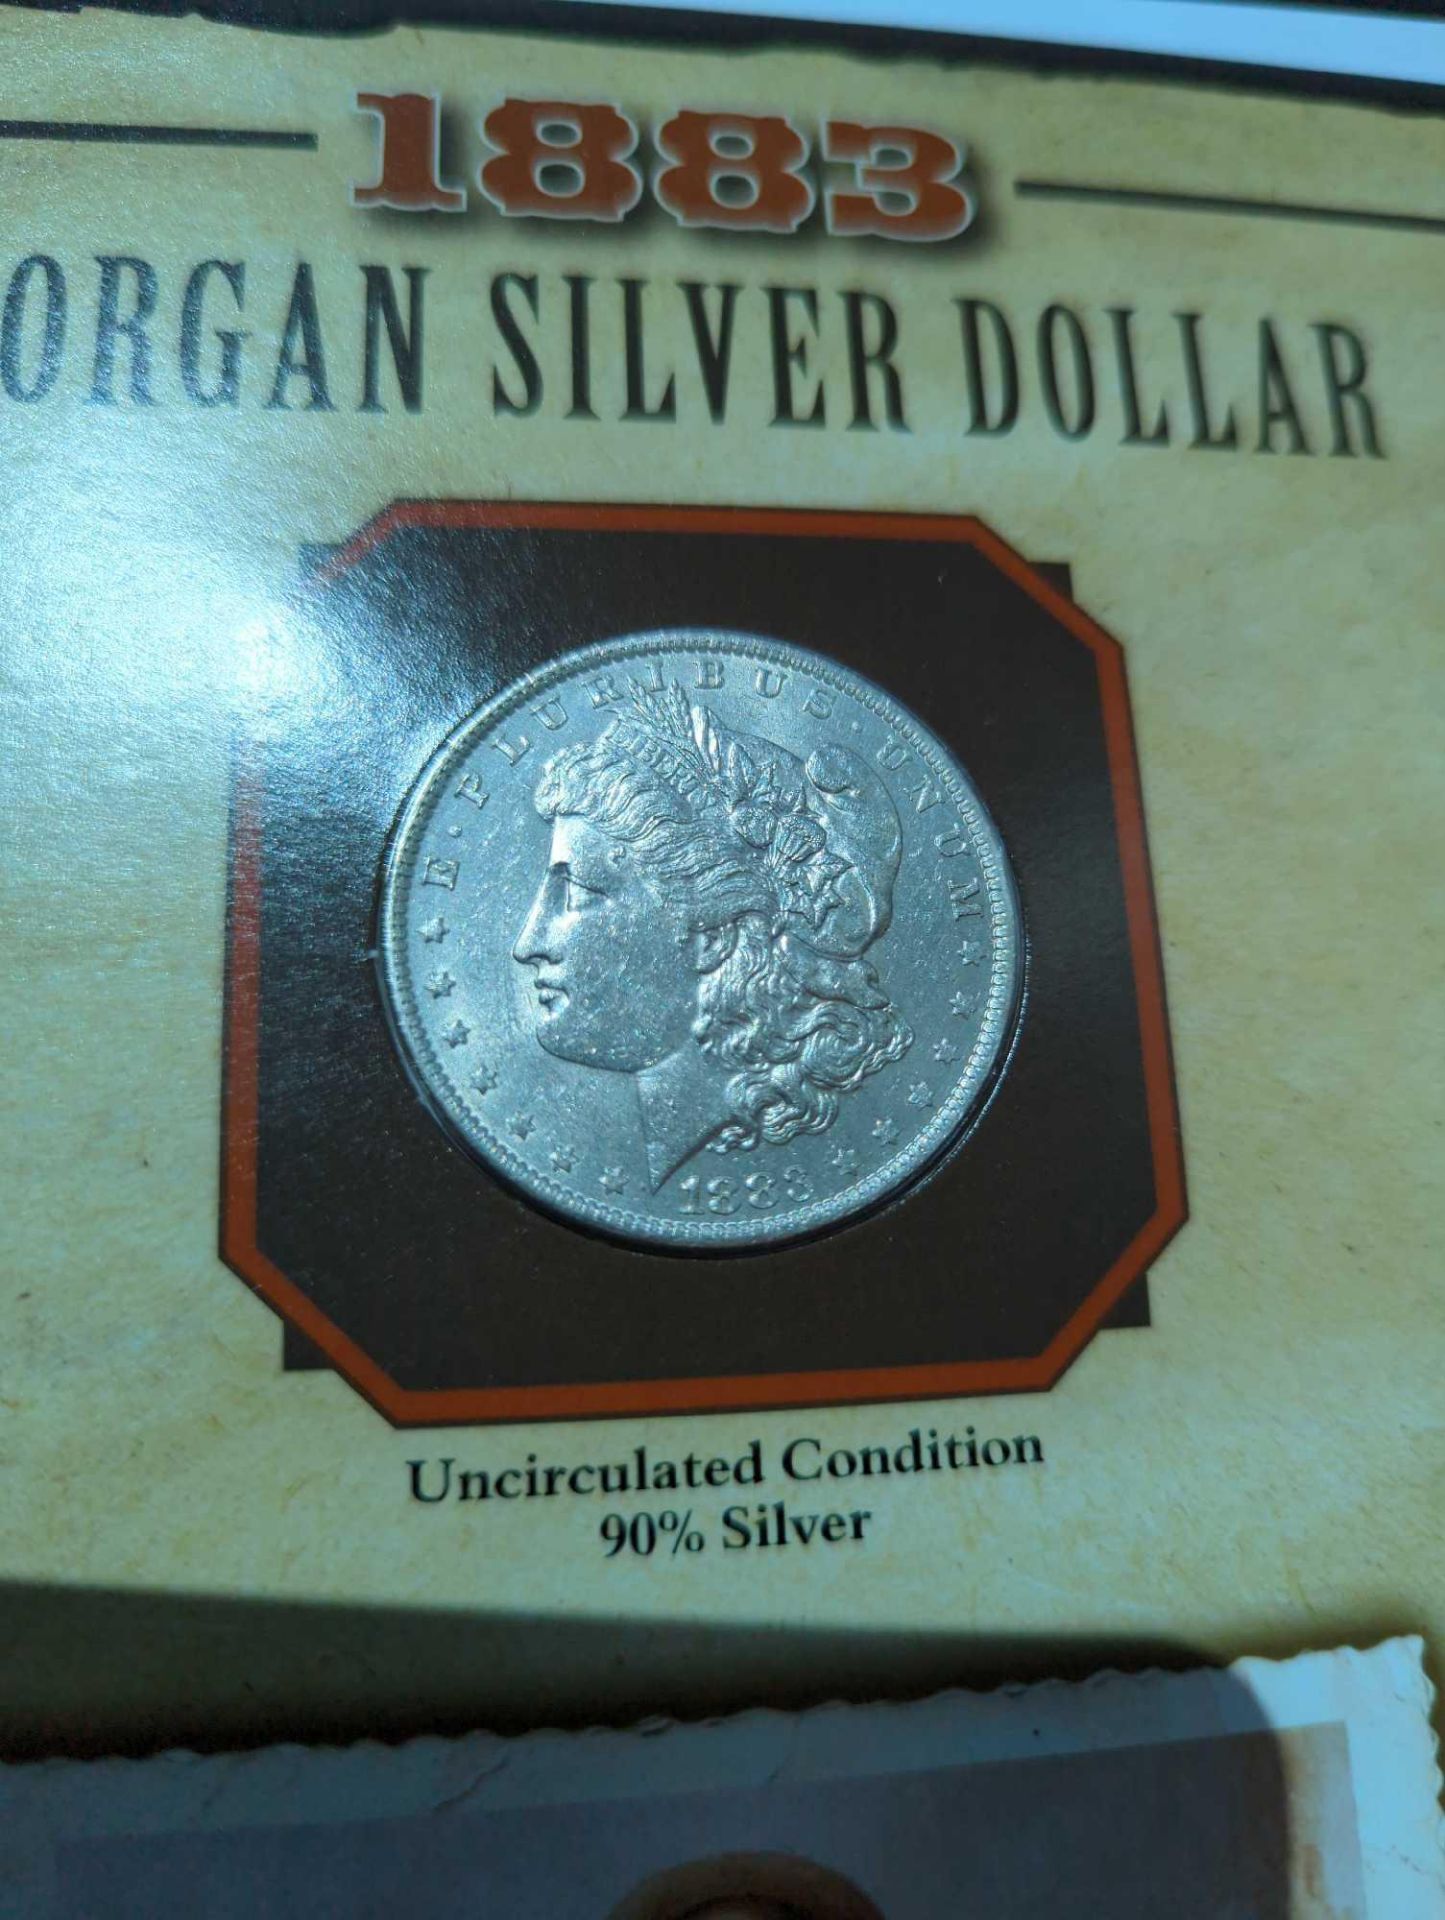 1883 Uncirculated Condition Morgan Dollar with Commemorative Geronimo stamp and facts - Image 2 of 7